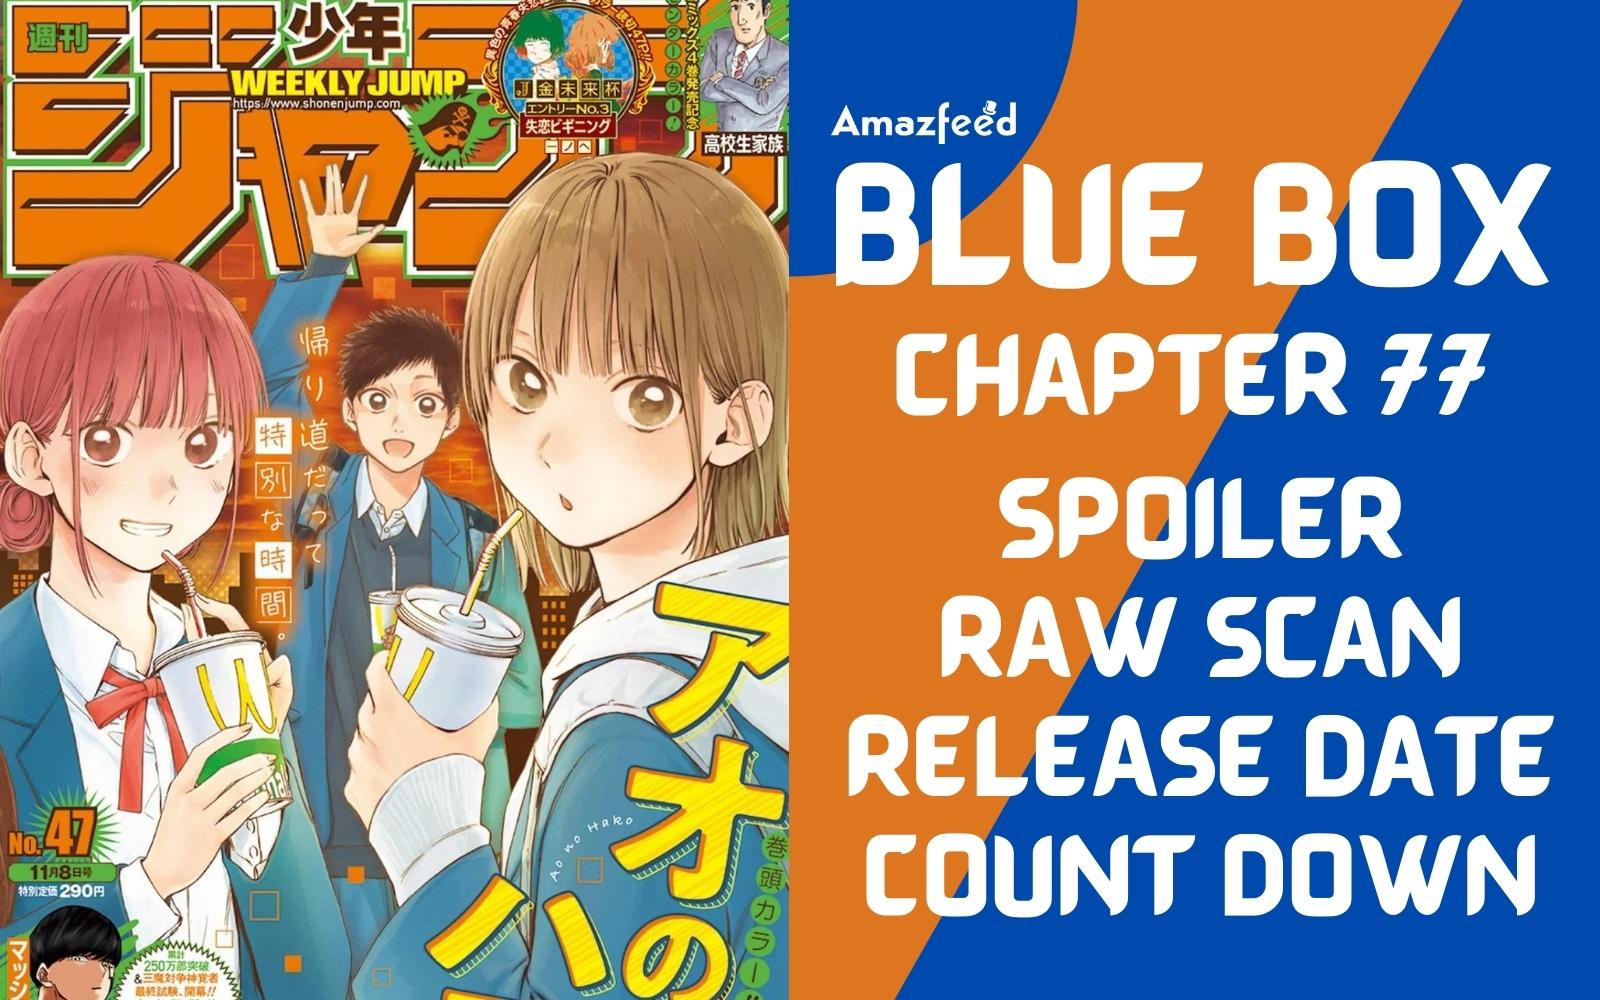 Blue Box Chapter 77 Spoiler, Raw Scan, Countdown, Release Date